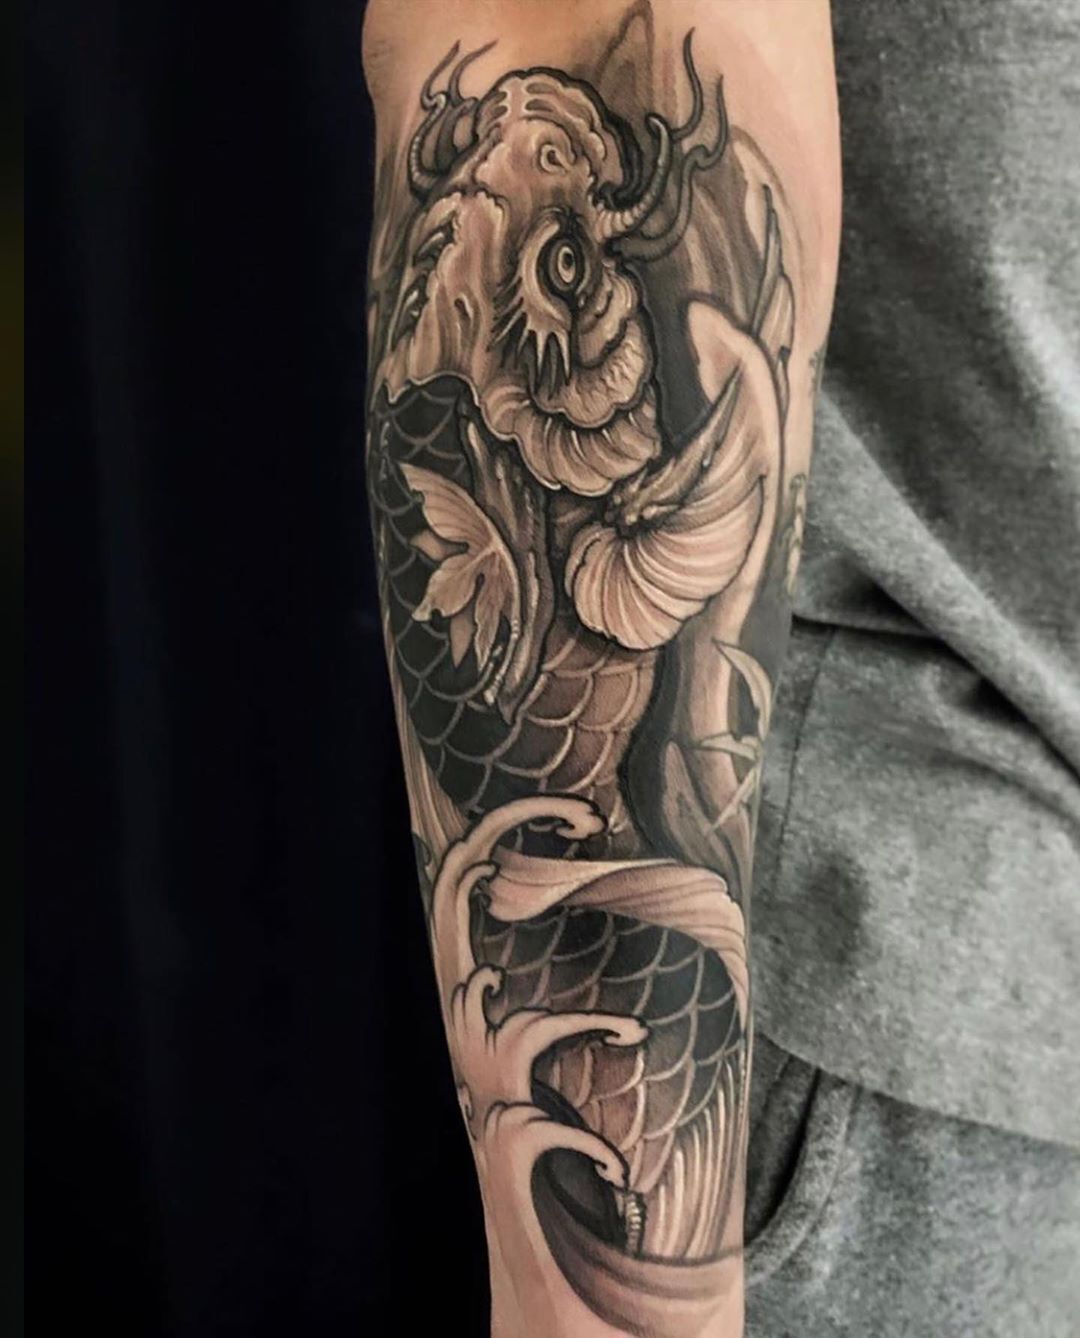 175+ Koi Fish Tattoos That Help You To Overcome Obstacles